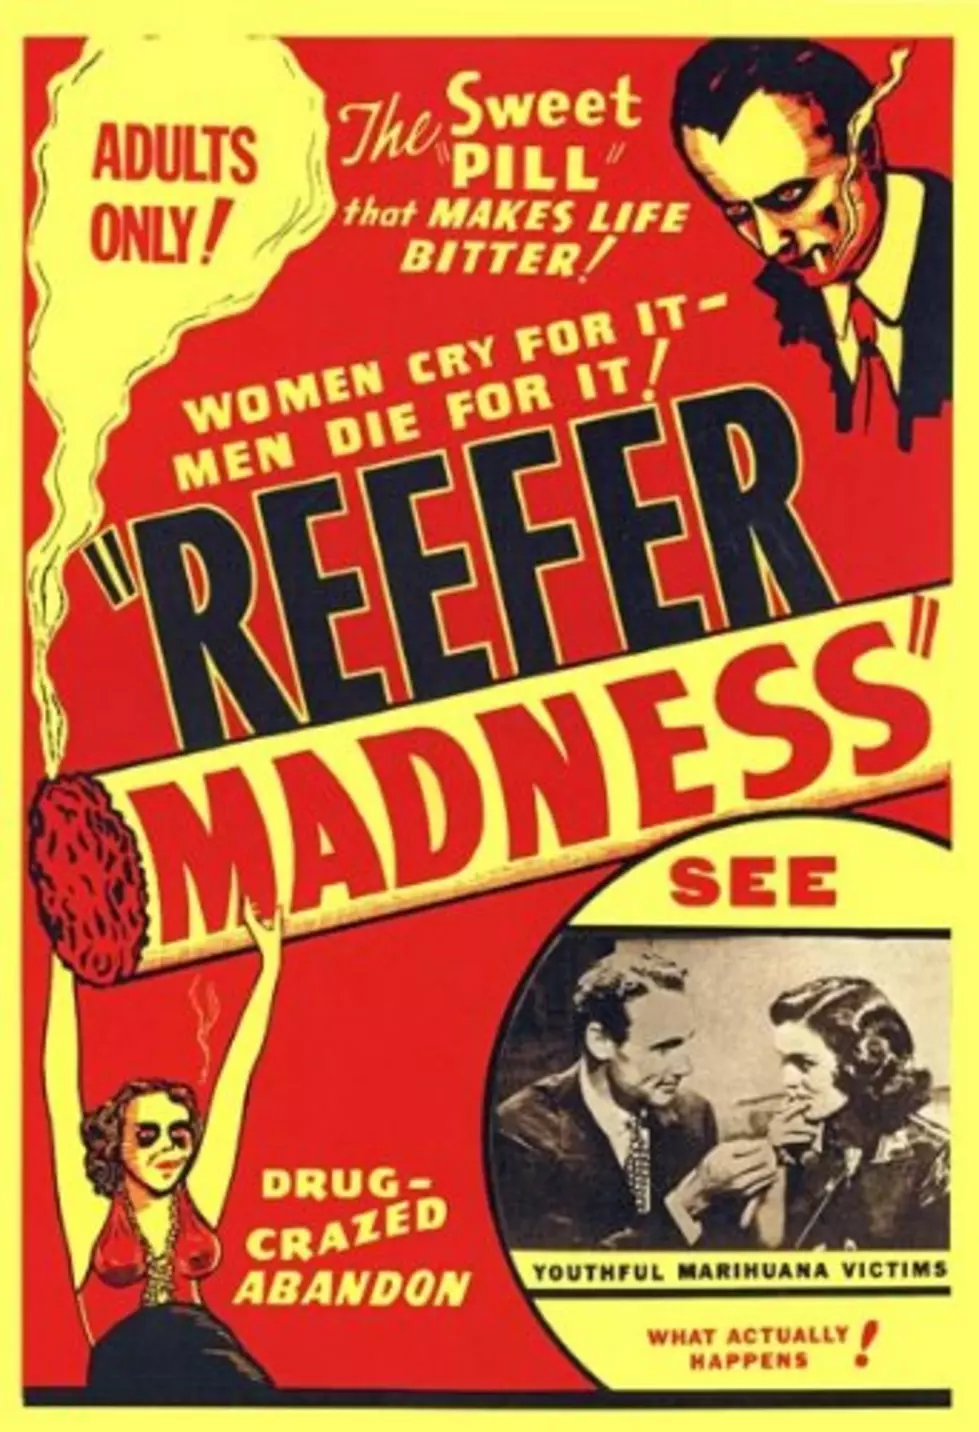 Spark Up With 'Threefer Madness' on 105.7 The Hawk